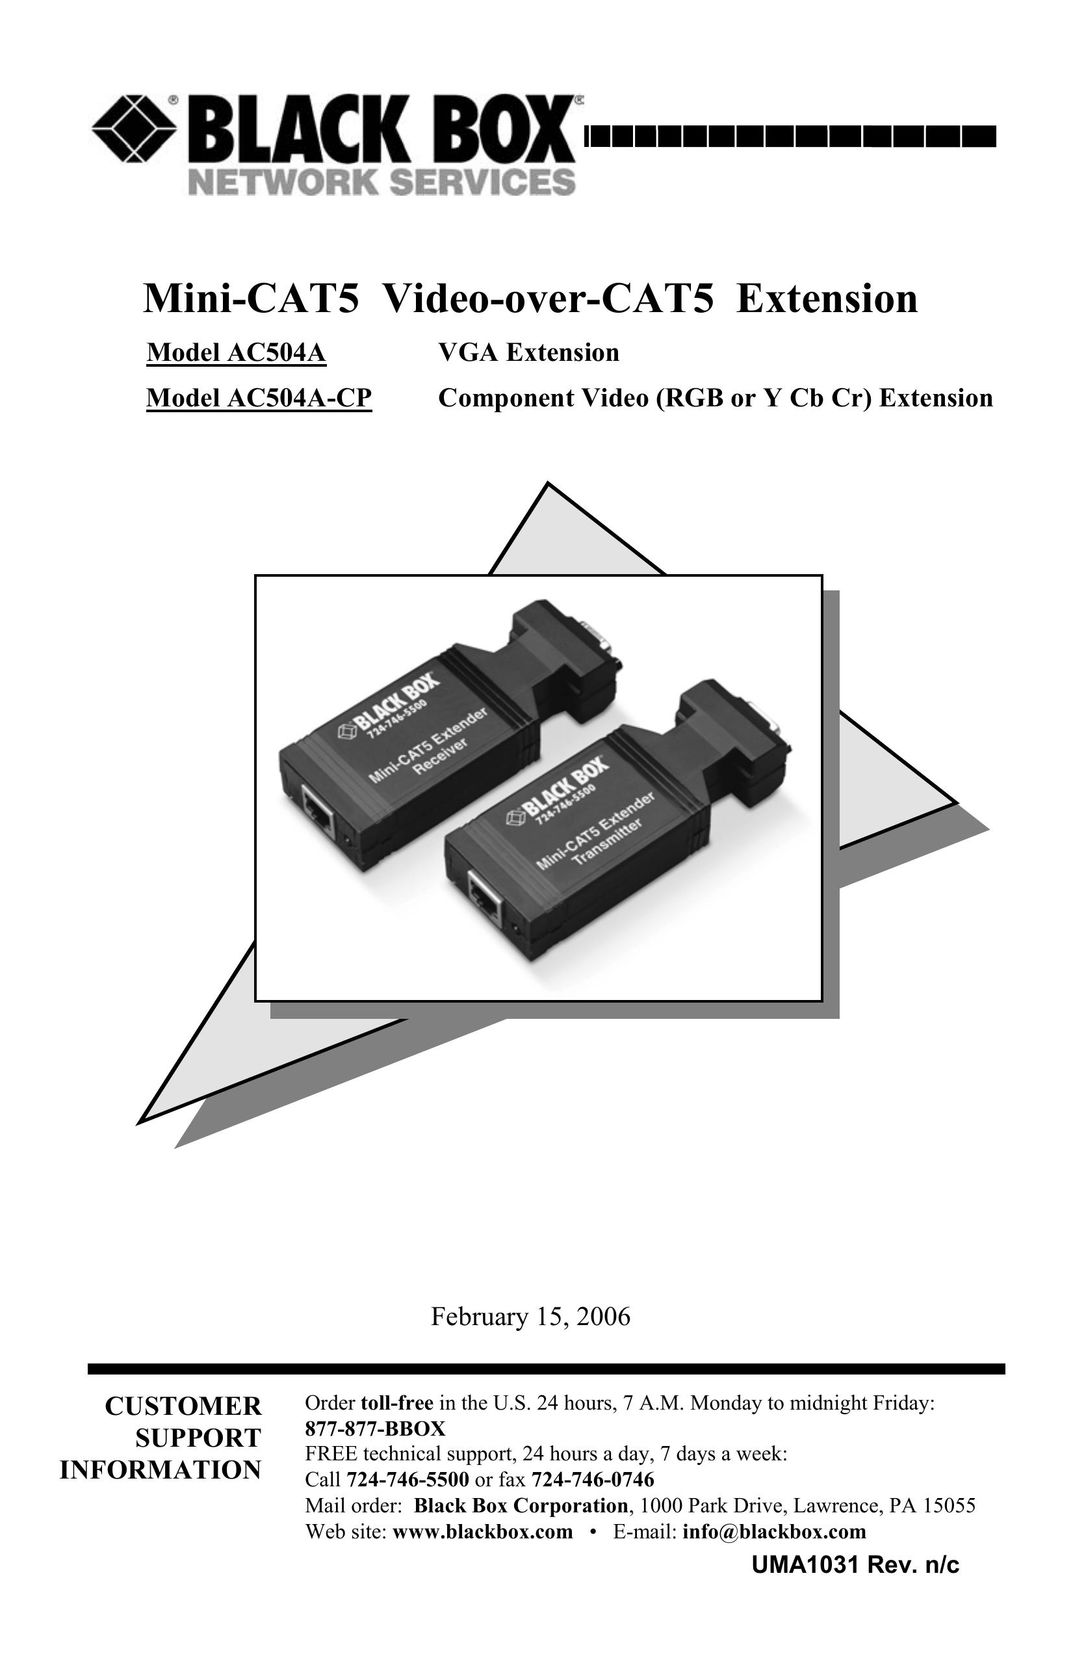 Black Box Mini-CAT5 Video-over-CAT5 Extension Electronic Accessory User Manual